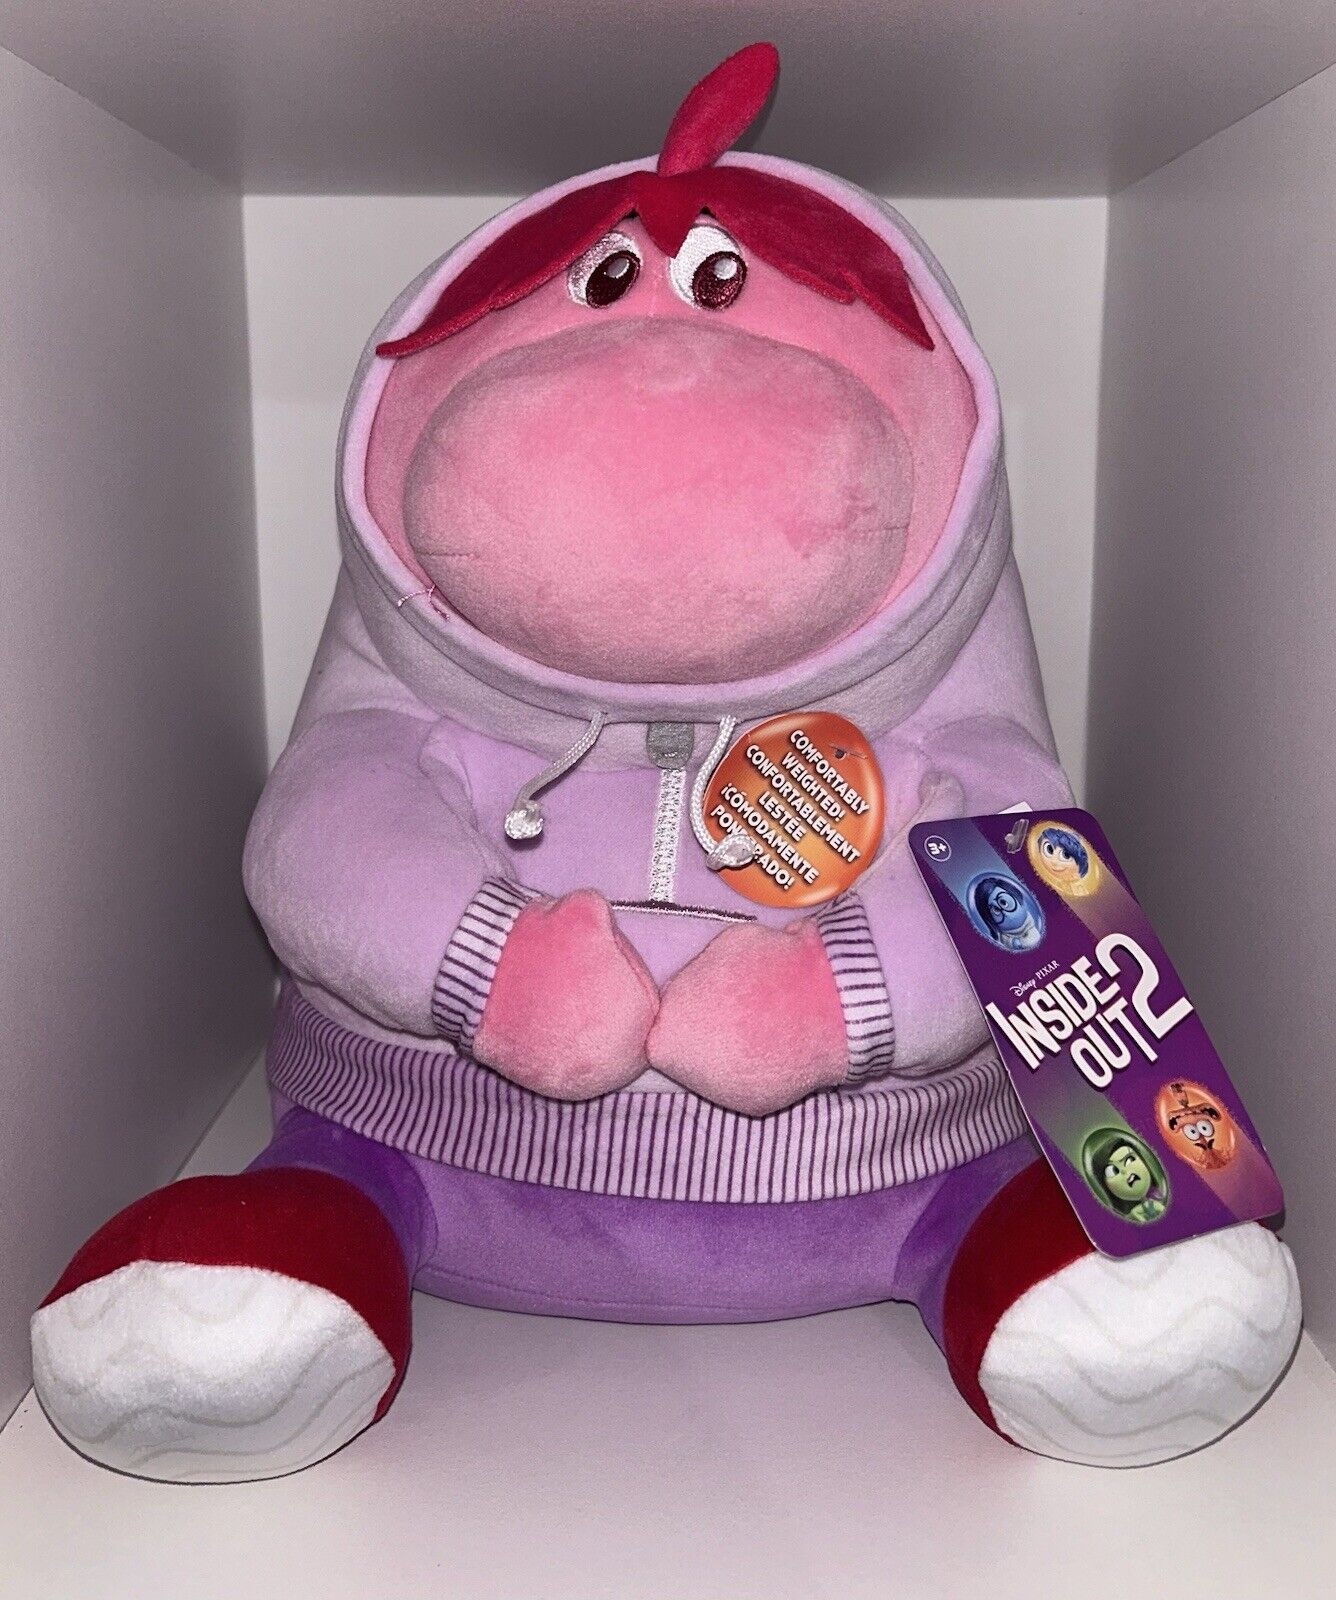 Inside Out 2 Weighted Comfort Plush Embarrassment, Disney Pixar, Just Play